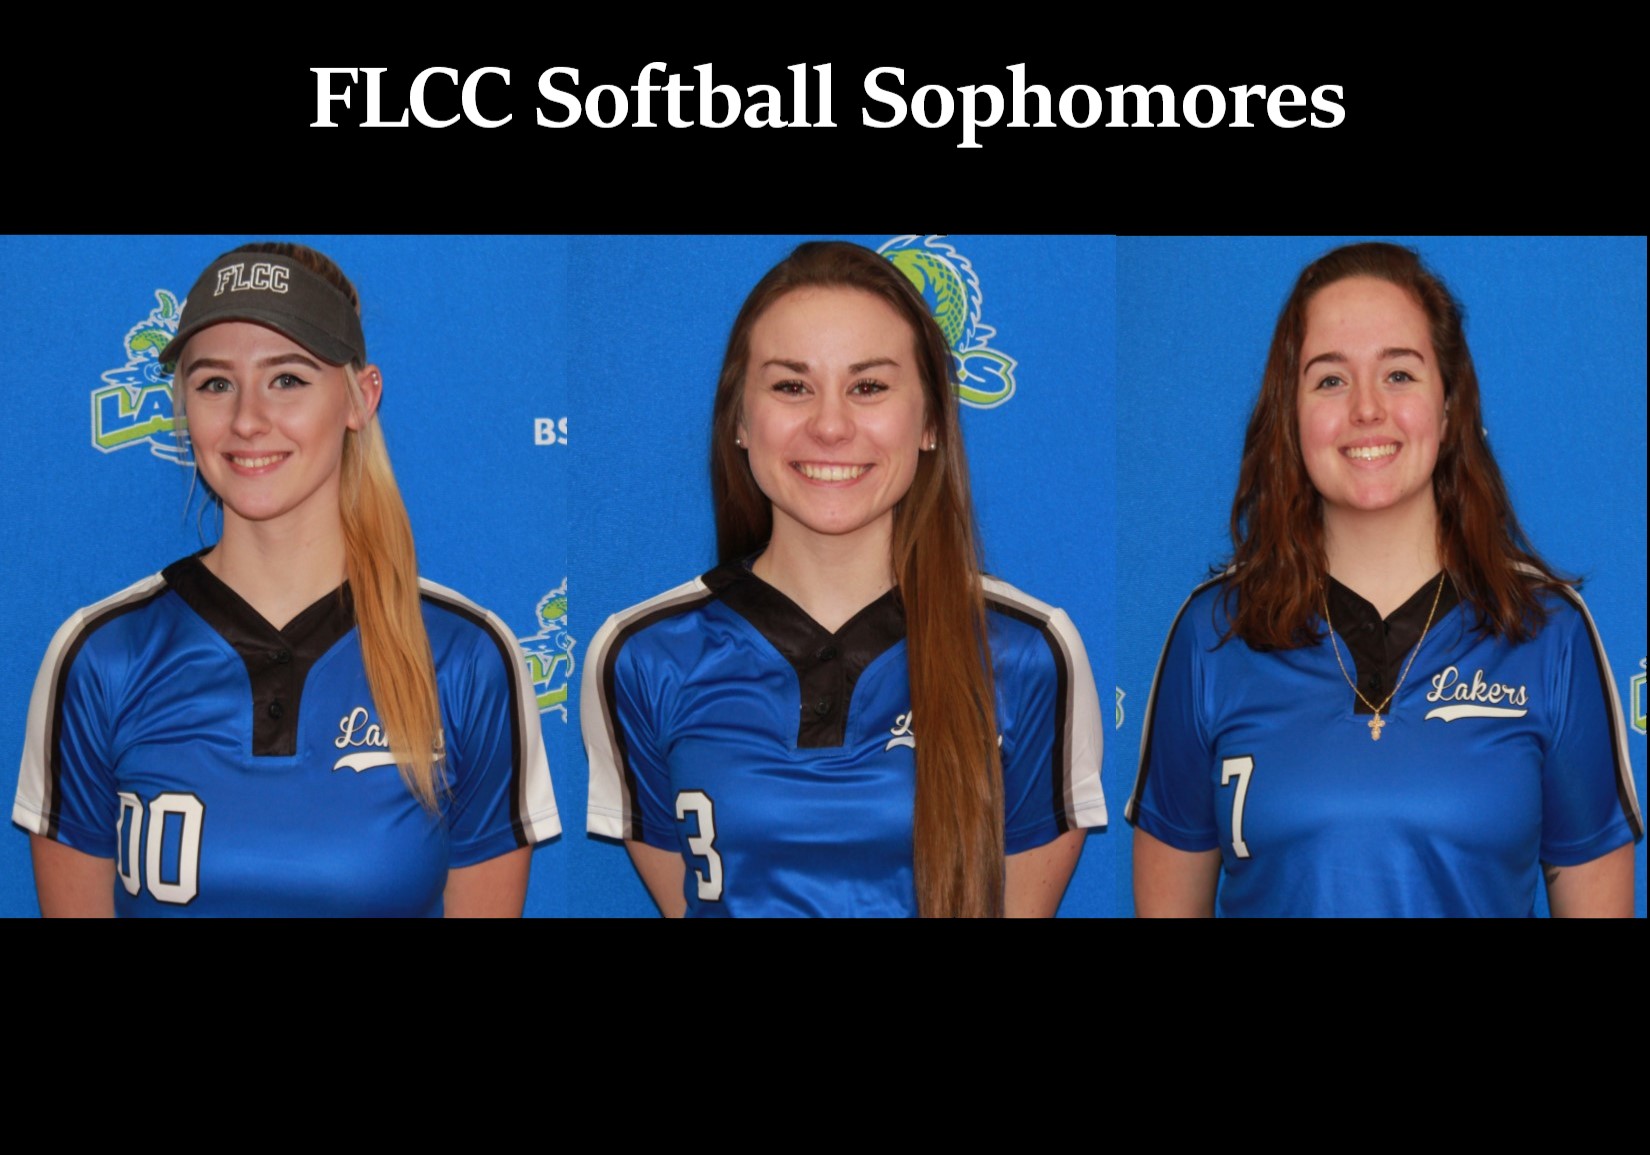 Letters from the FLCC Softball Sophomores